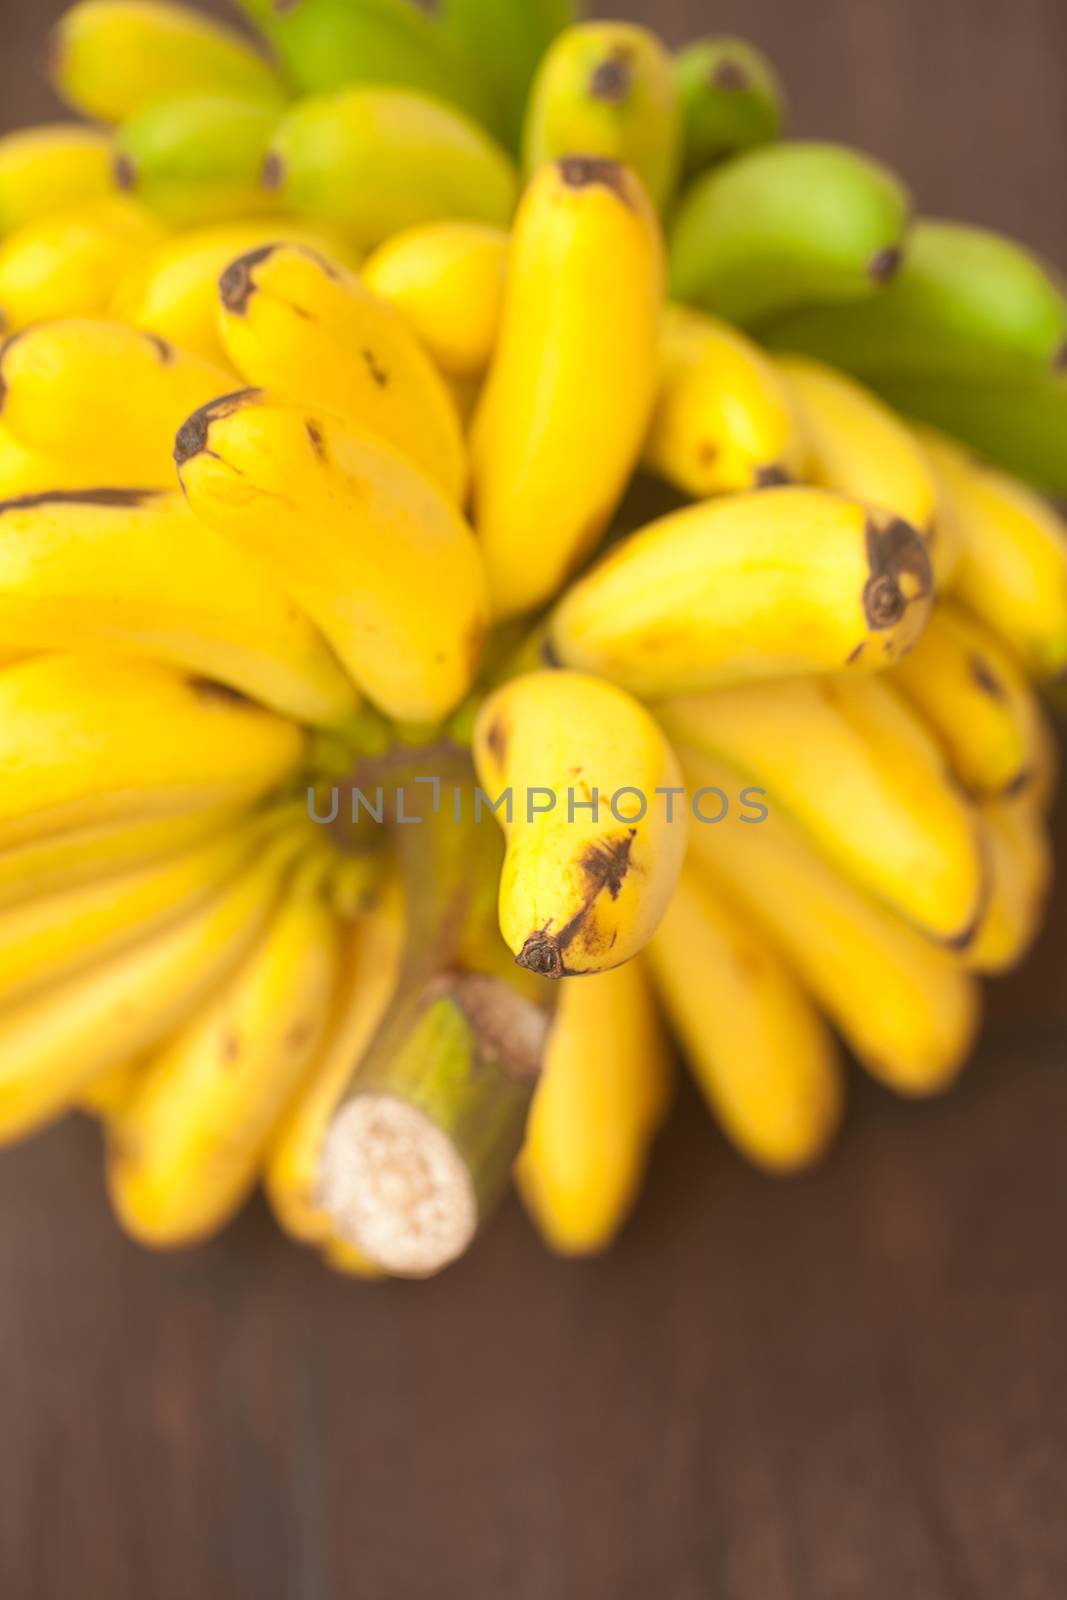 bunch of bananas on a wooden surface by jannyjus